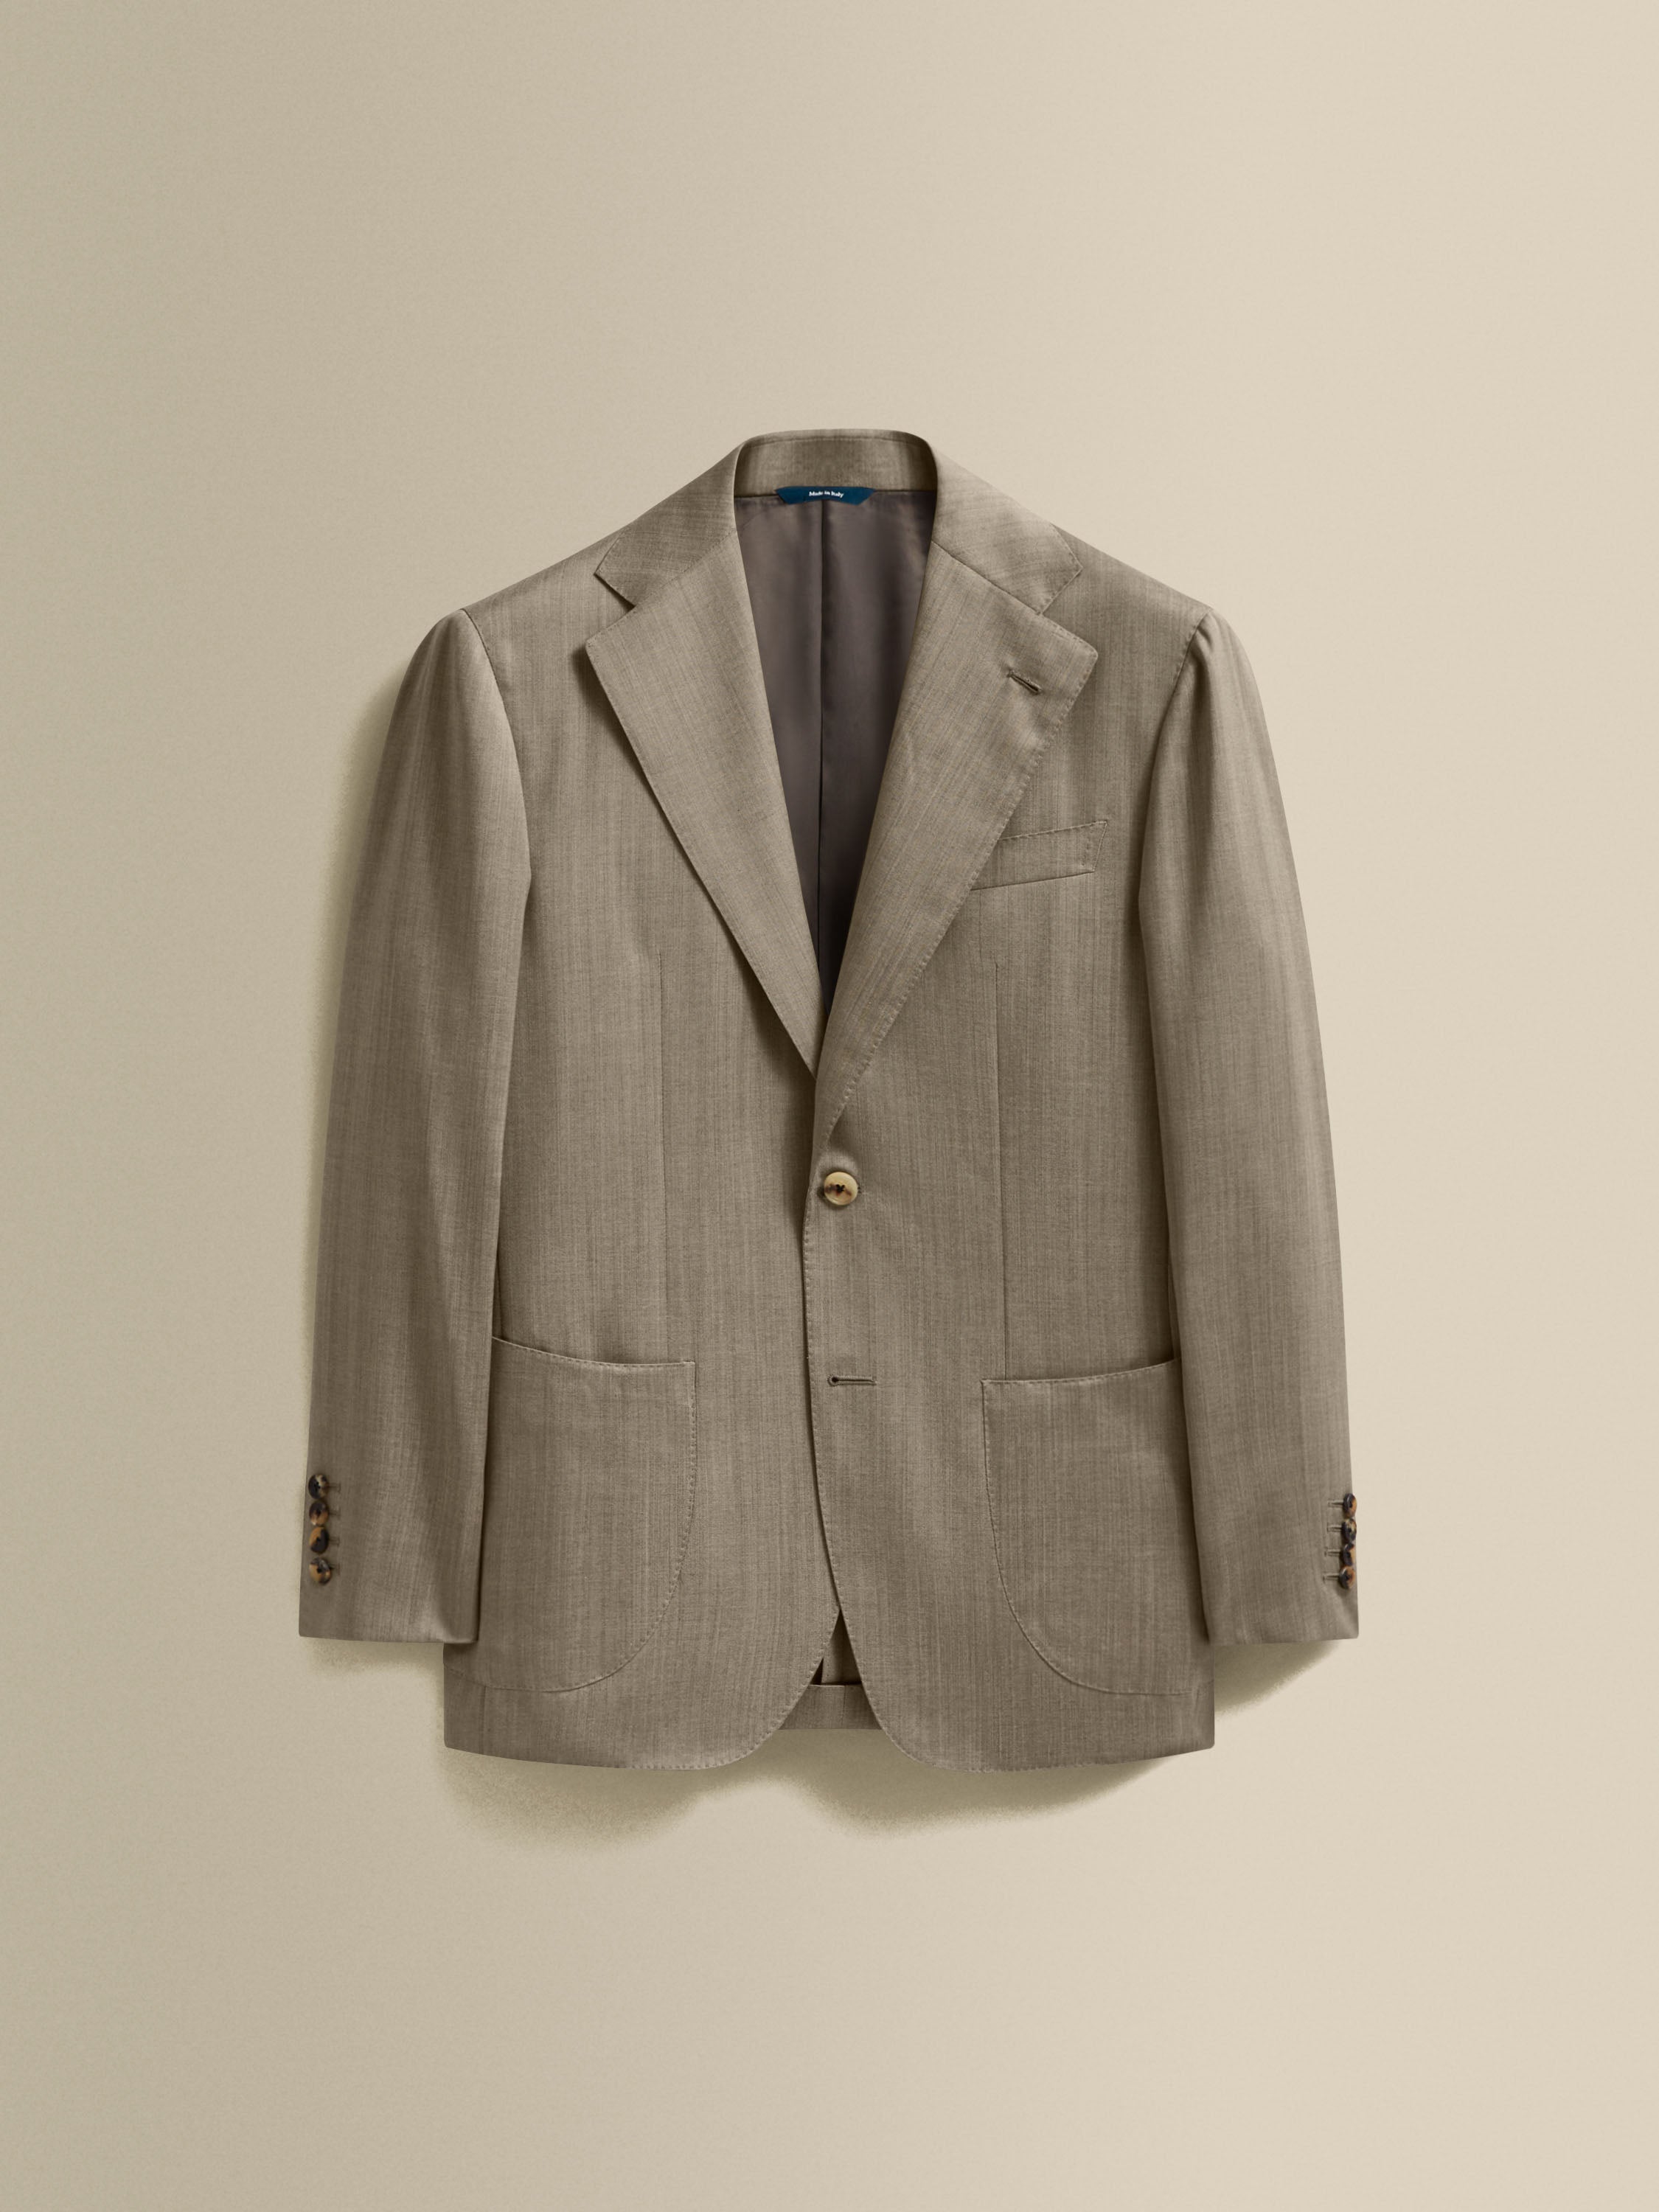 Wool Unstructured Single Breasted Suit Taupe Jacket Product Image